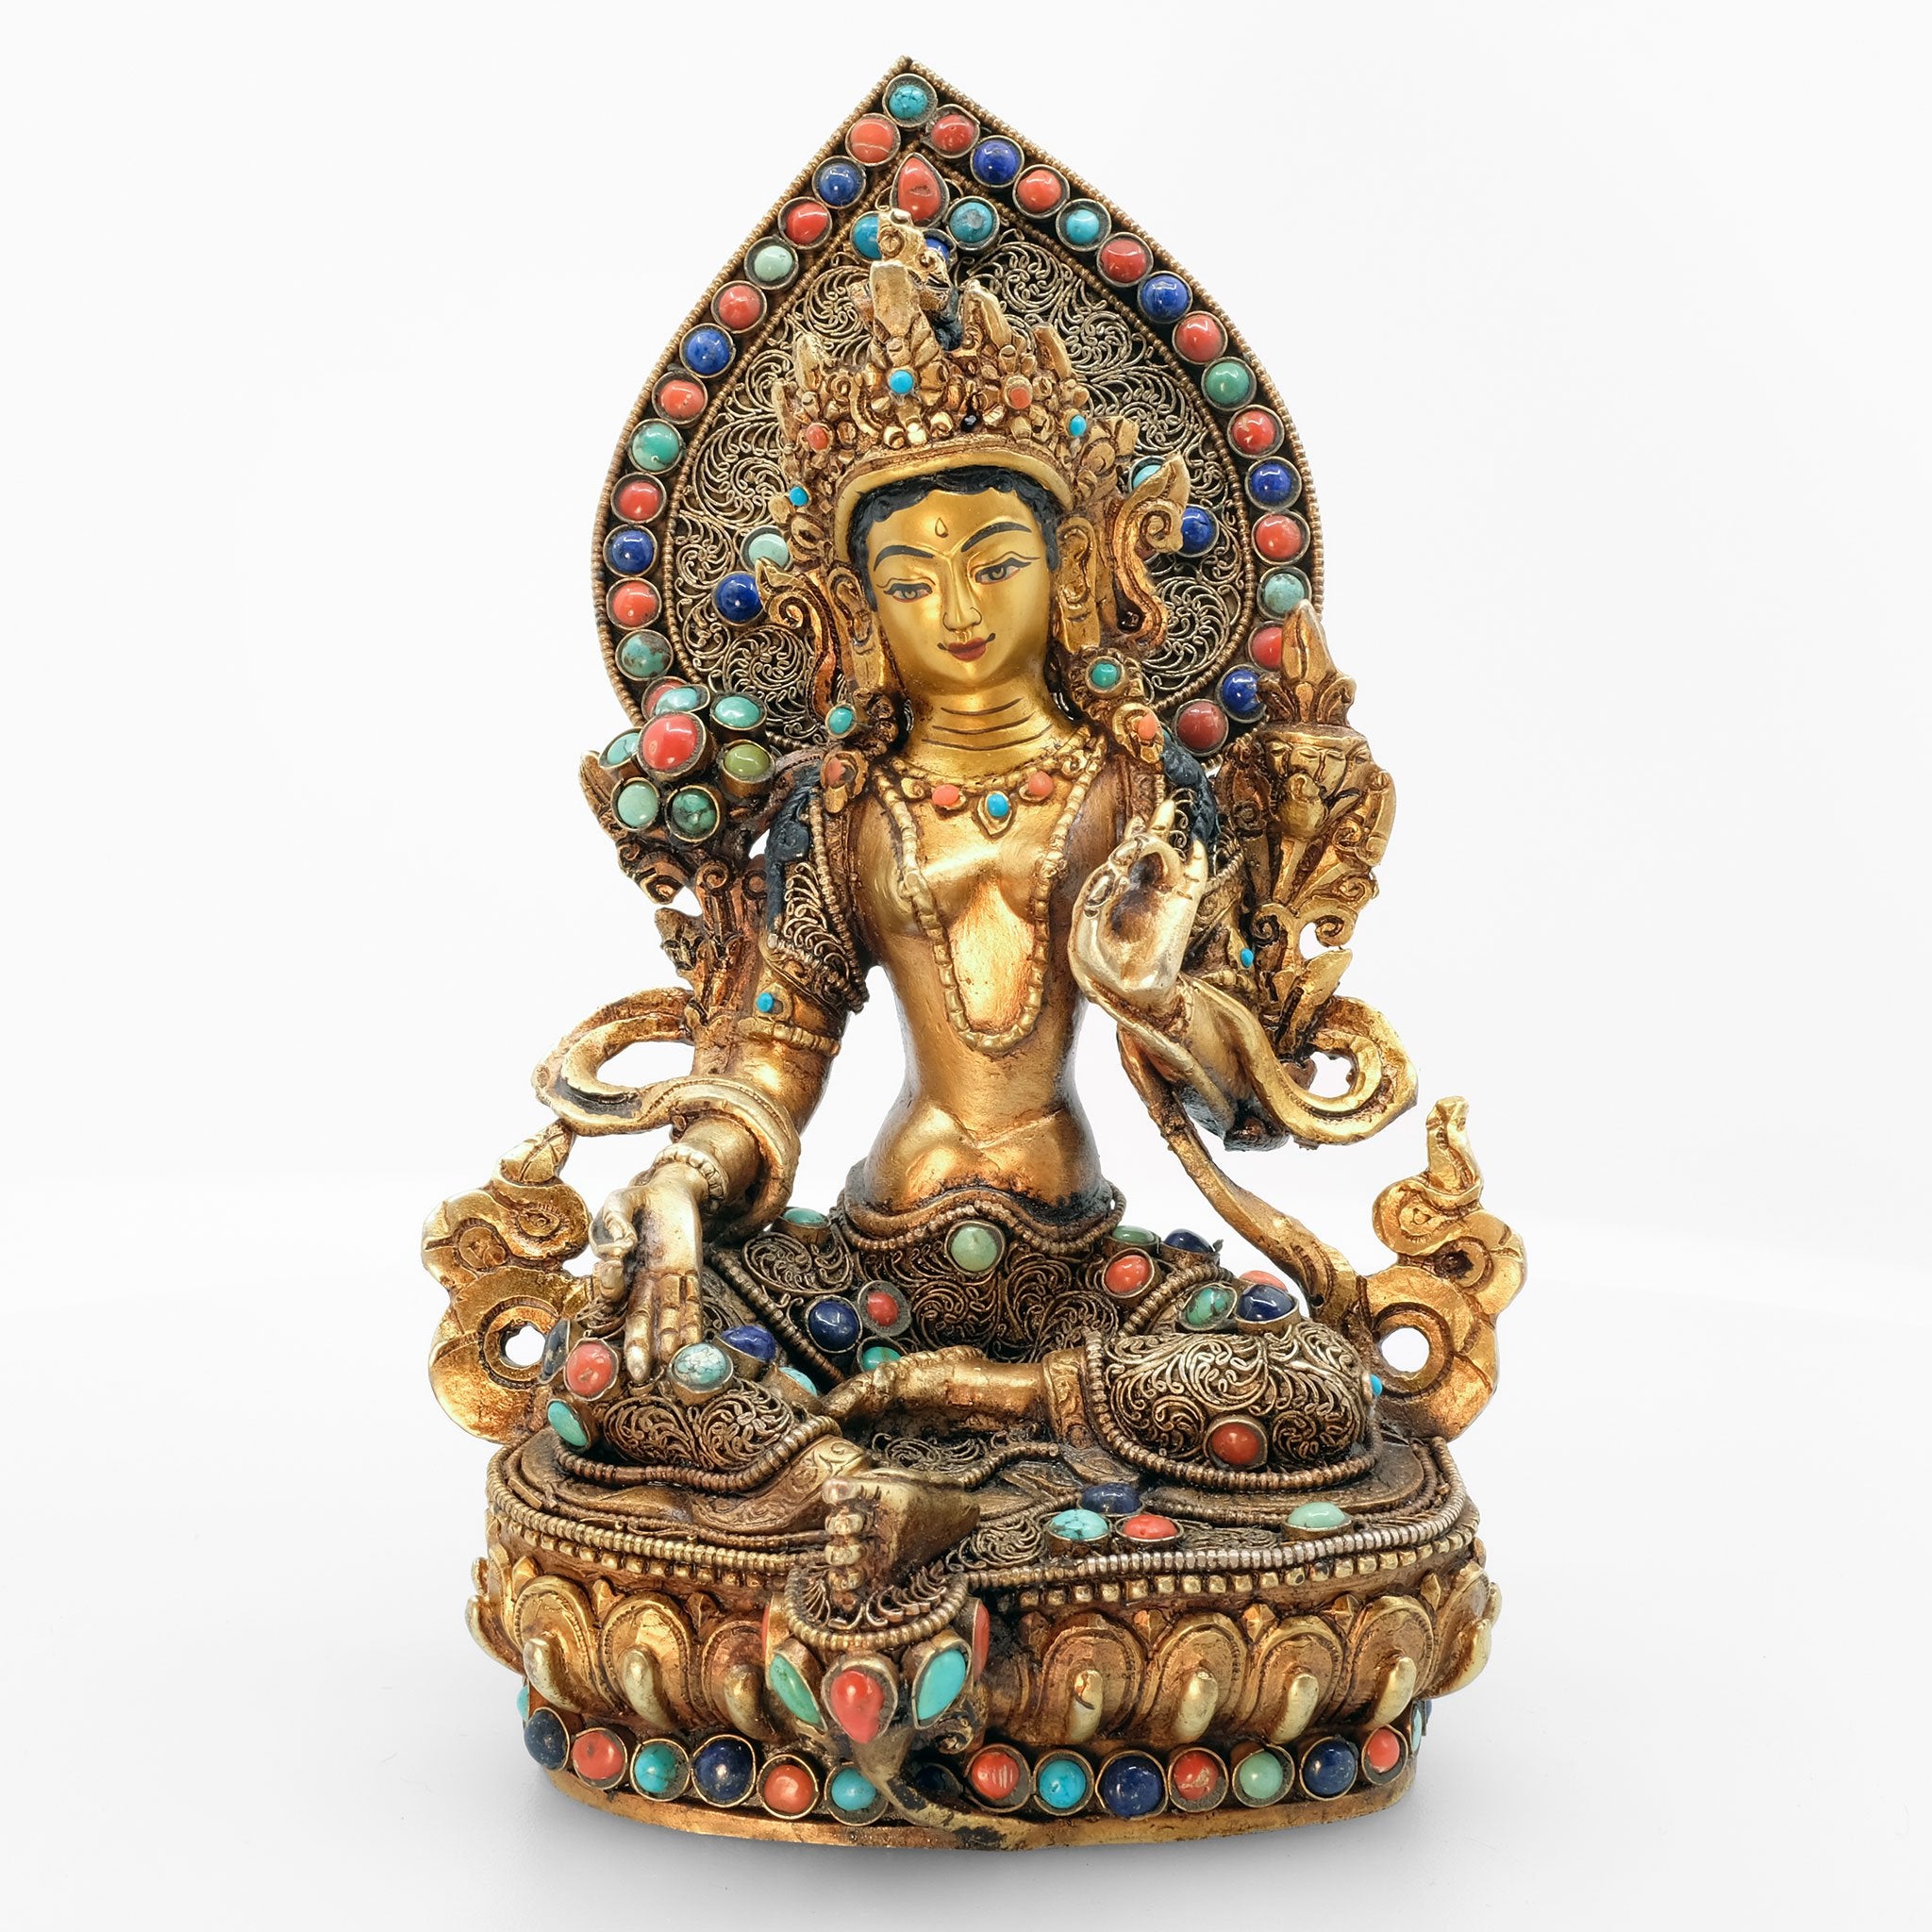 Green Tara statue, body from copper, lost wax casting, decorated with fine filigree, gold and silver plated, set with turquoise, coral and lapis lazuli. The face is set in gold. Handmade in Nepal